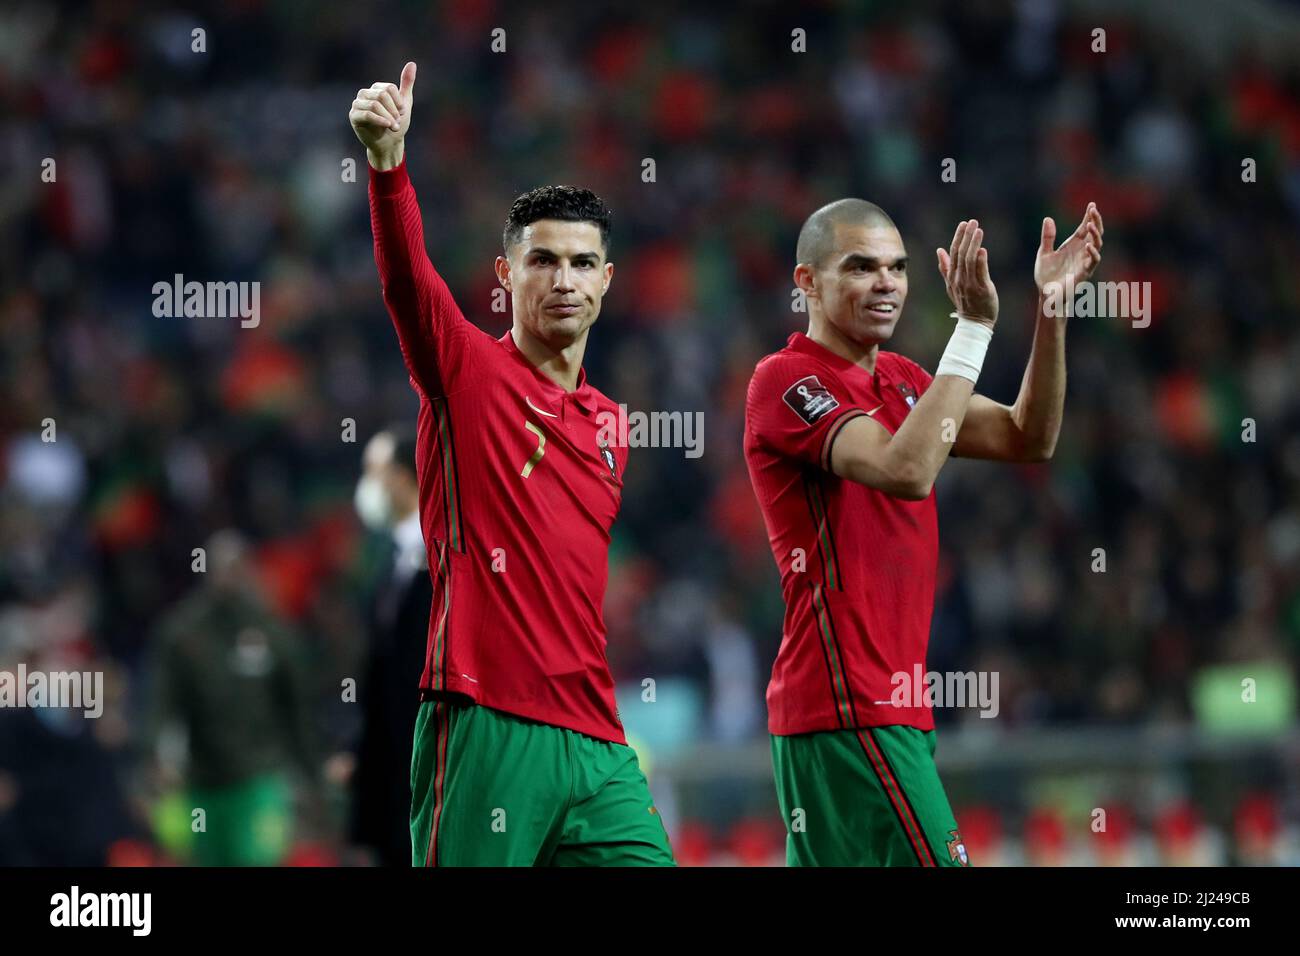 Porto, Portugal. 29th Mar, 2022. Portugal's Cristiano Ronaldo (L) and Pepe celebrate the victory at the end of the 2022 FIFA World Cup Qualifier football match between Portugal and North Macedonia at the Dragao stadium in Porto, Portugal, on March 29, 2022. Credit: Pedro Fiuza/Xinhua/Alamy Live News Stock Photo